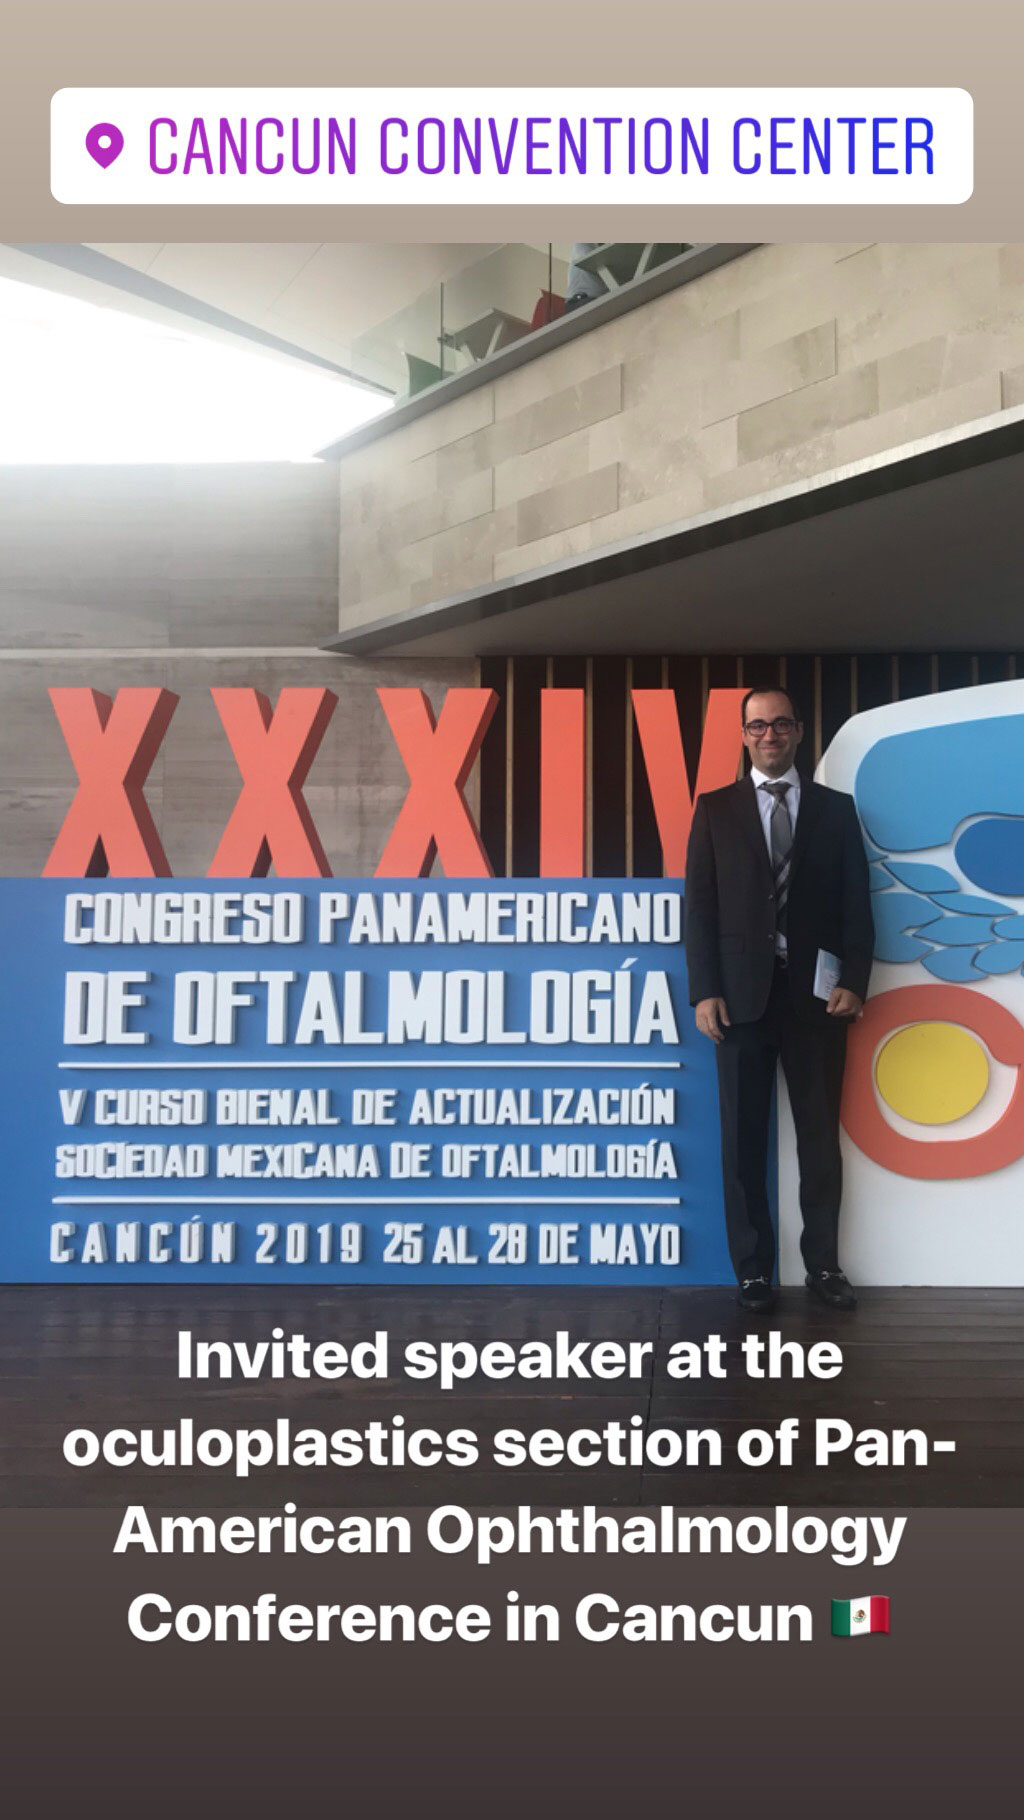 Dr. Taban was an invited speaker at the 2019 Pan-American Ophthalmology conference.